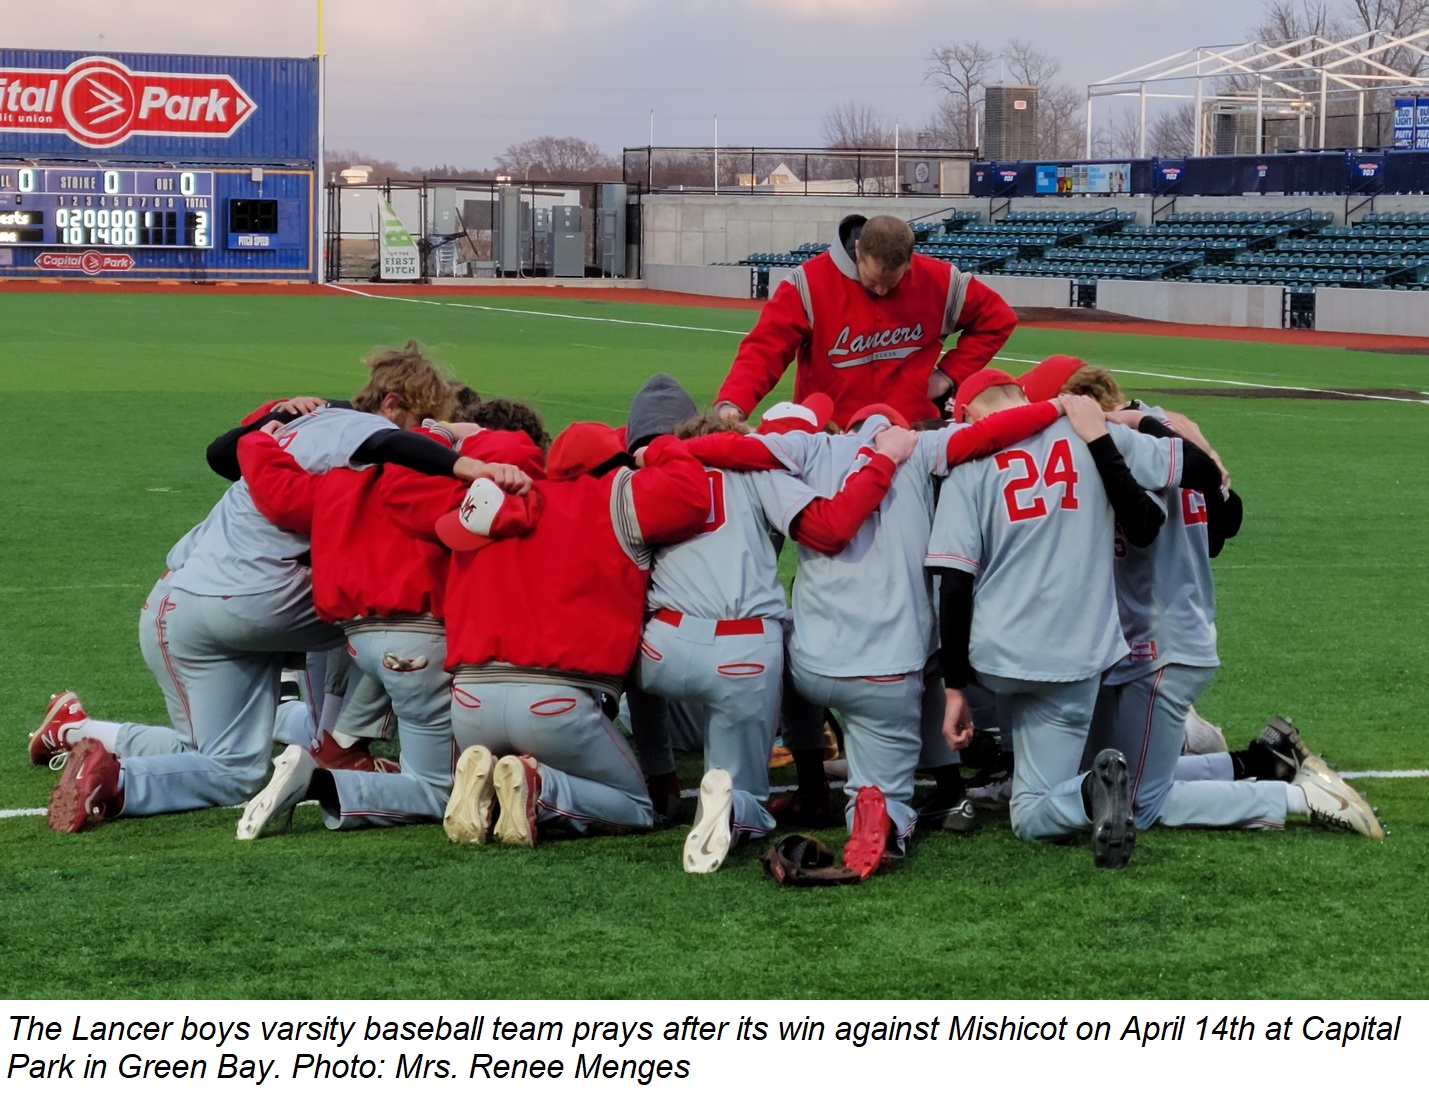 The Lancer varsity baseball team prays after its win against Mishicot at Capital Park in Green Bay on April 14th.